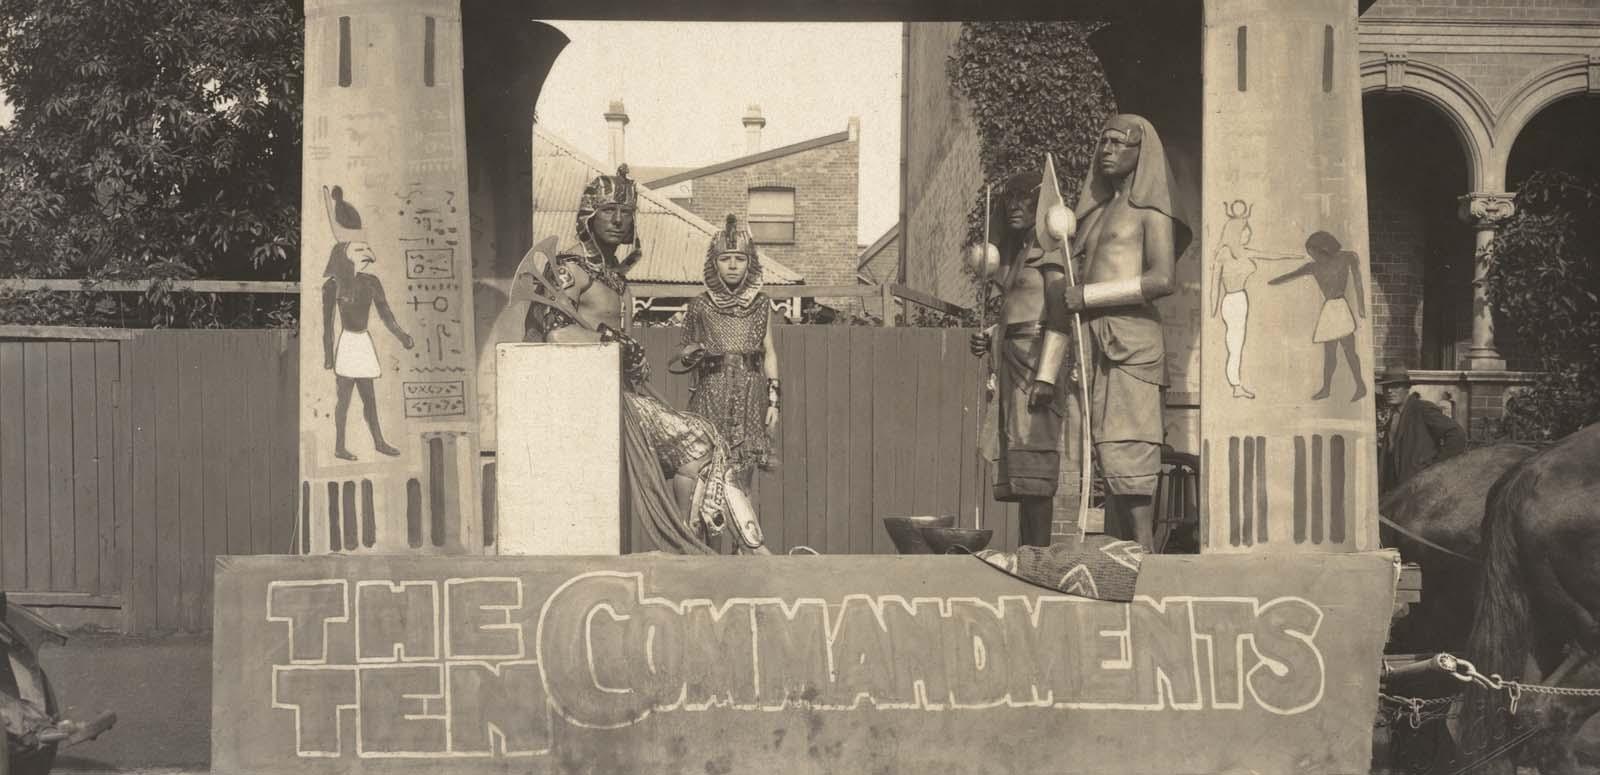 Four actors in costume pose on a horse-drawn trailer promoting The Ten Commandments in 1925